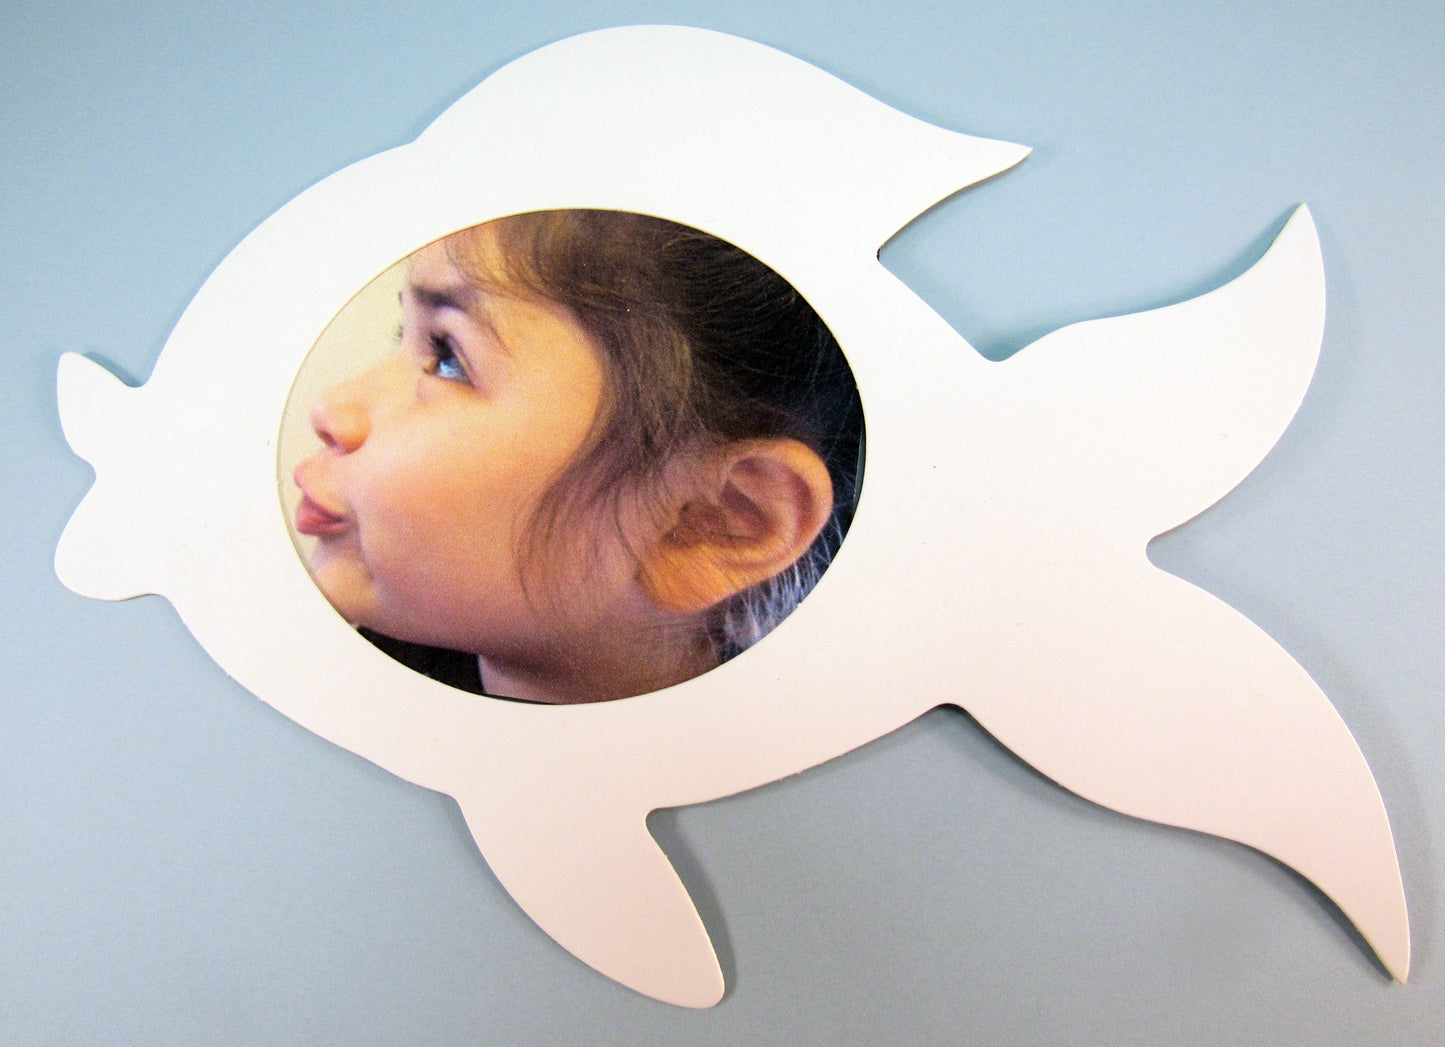 Fish Face (Fish Photo Frame): Art Activity inspired by A Fish Out of Water by Helen Palmer